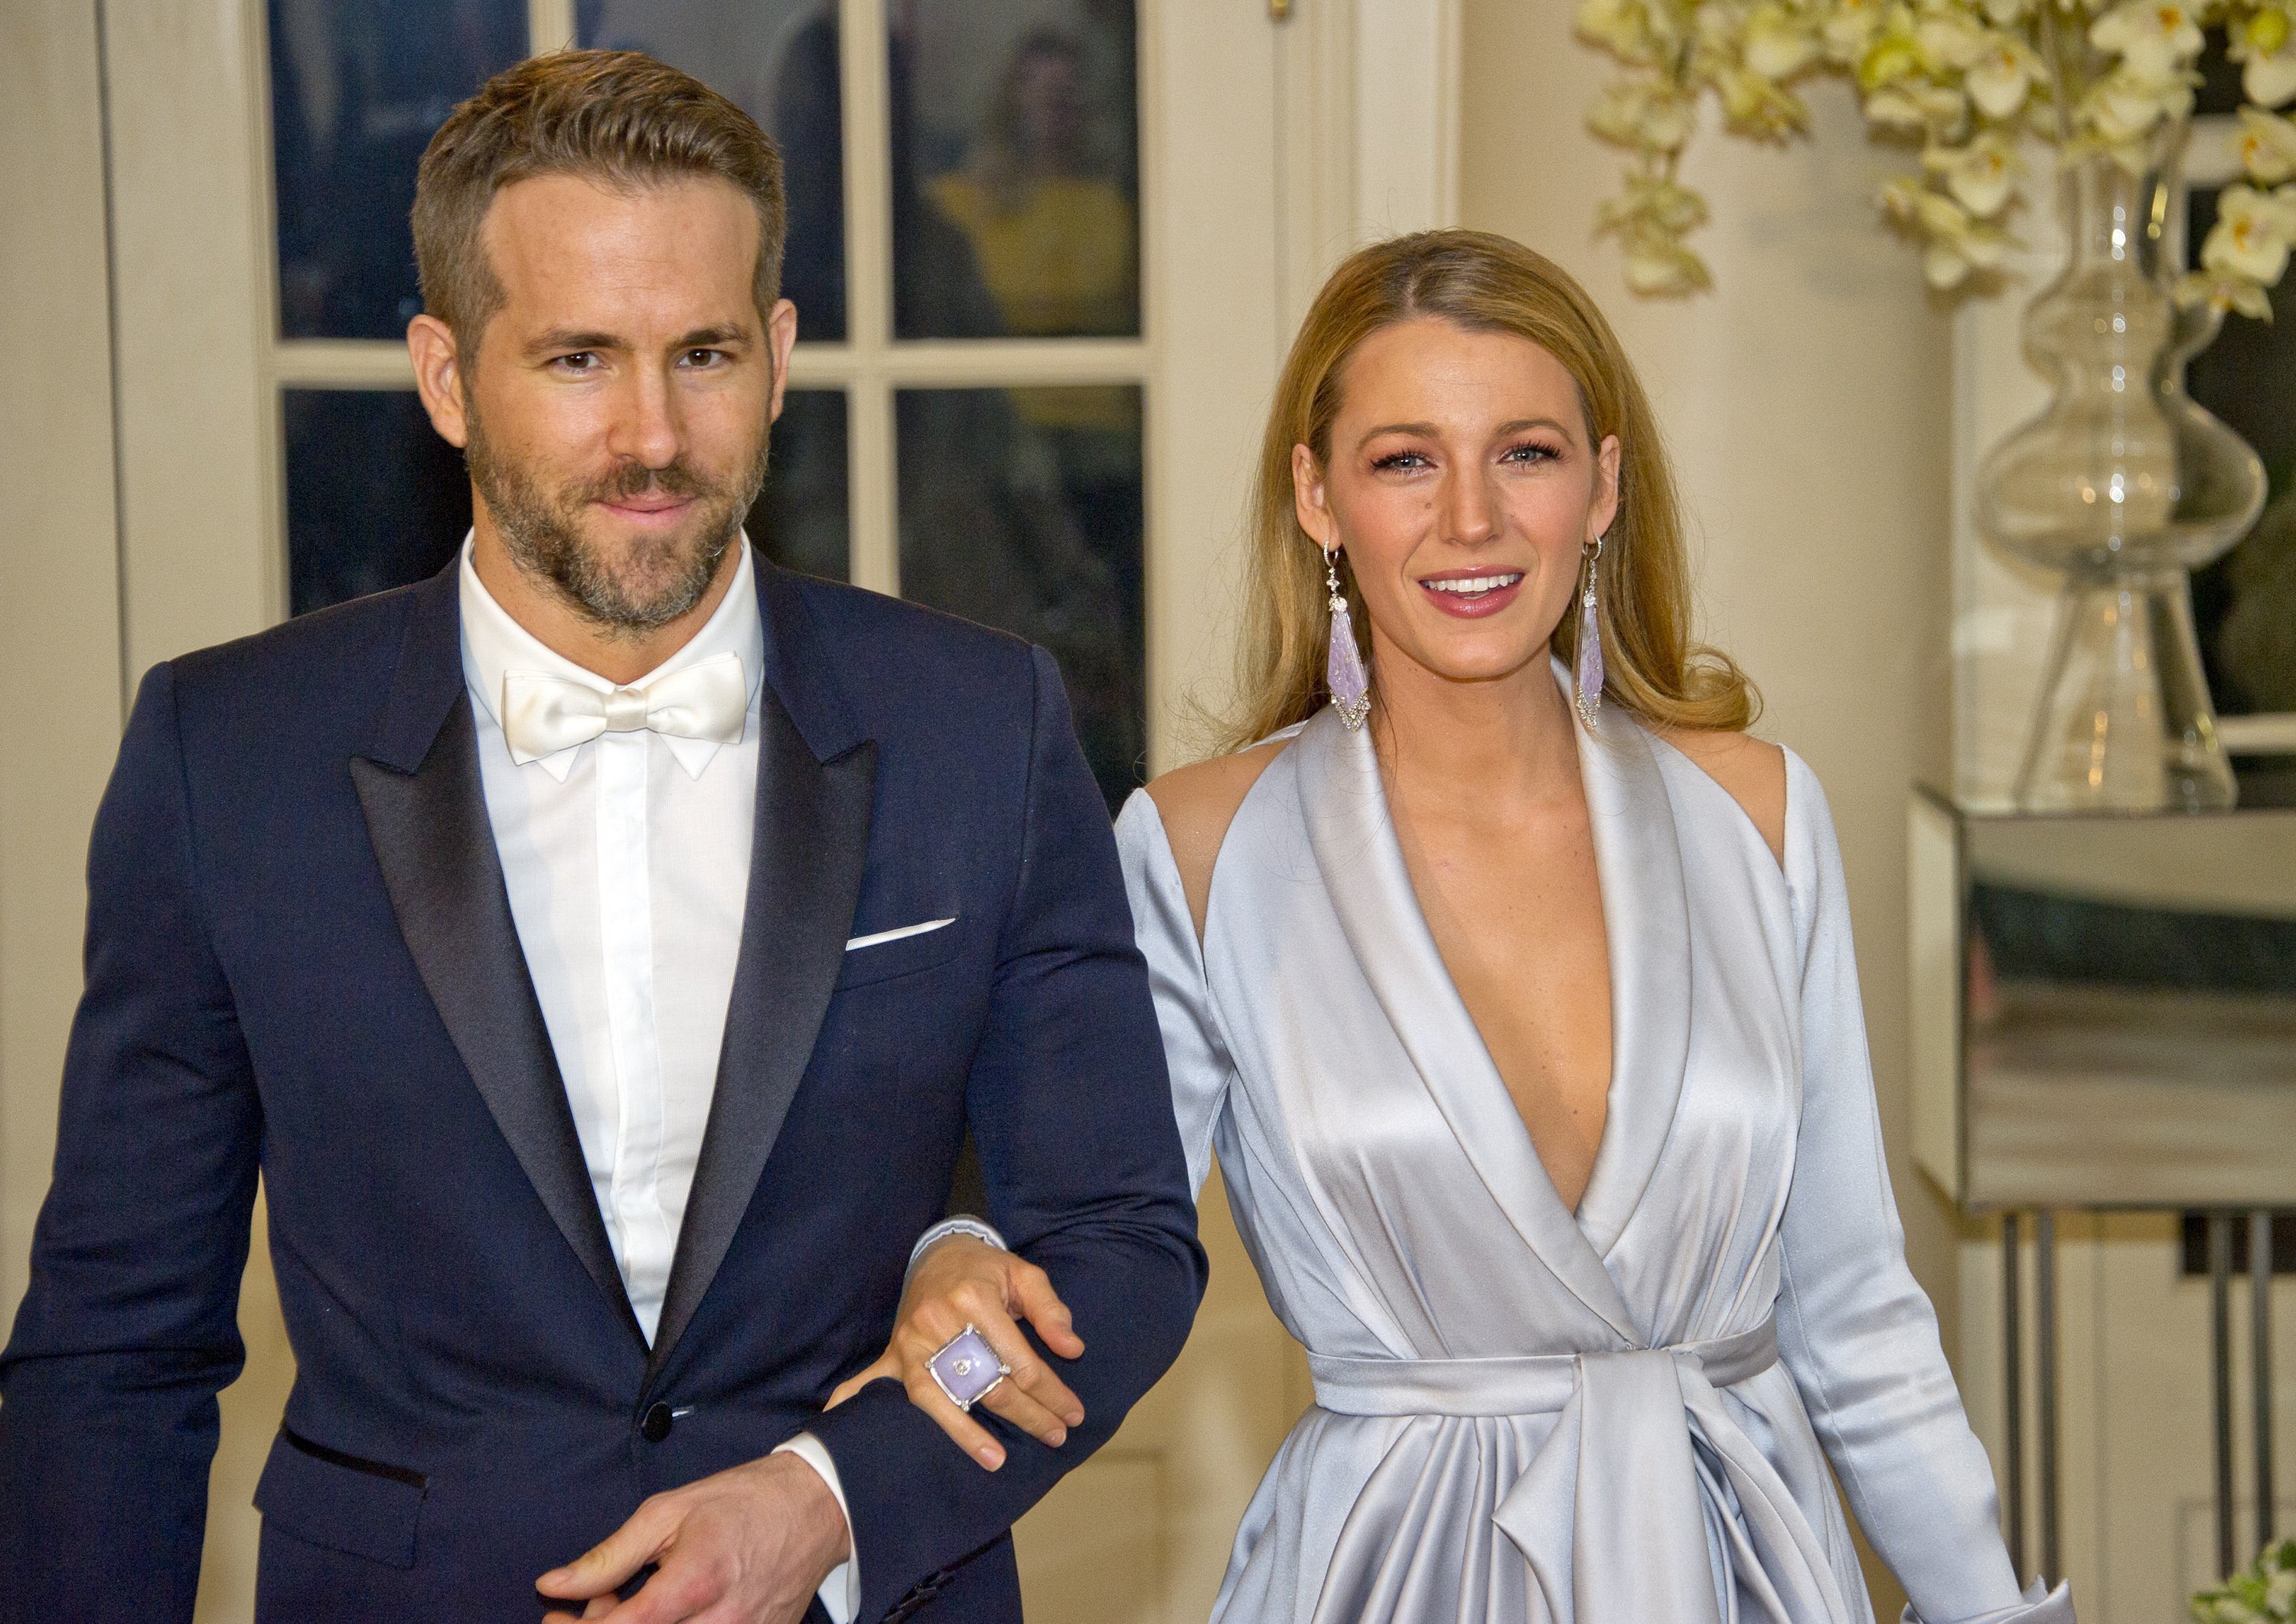 Ryan Reynolds and Blake Lively arrive for the State Dinner in honor of Prime Minister Trudeau and Mrs. Sophie Trudeau of Canada at the White House March 10, 2016, in Washington, DC. | Source: Getty Images.